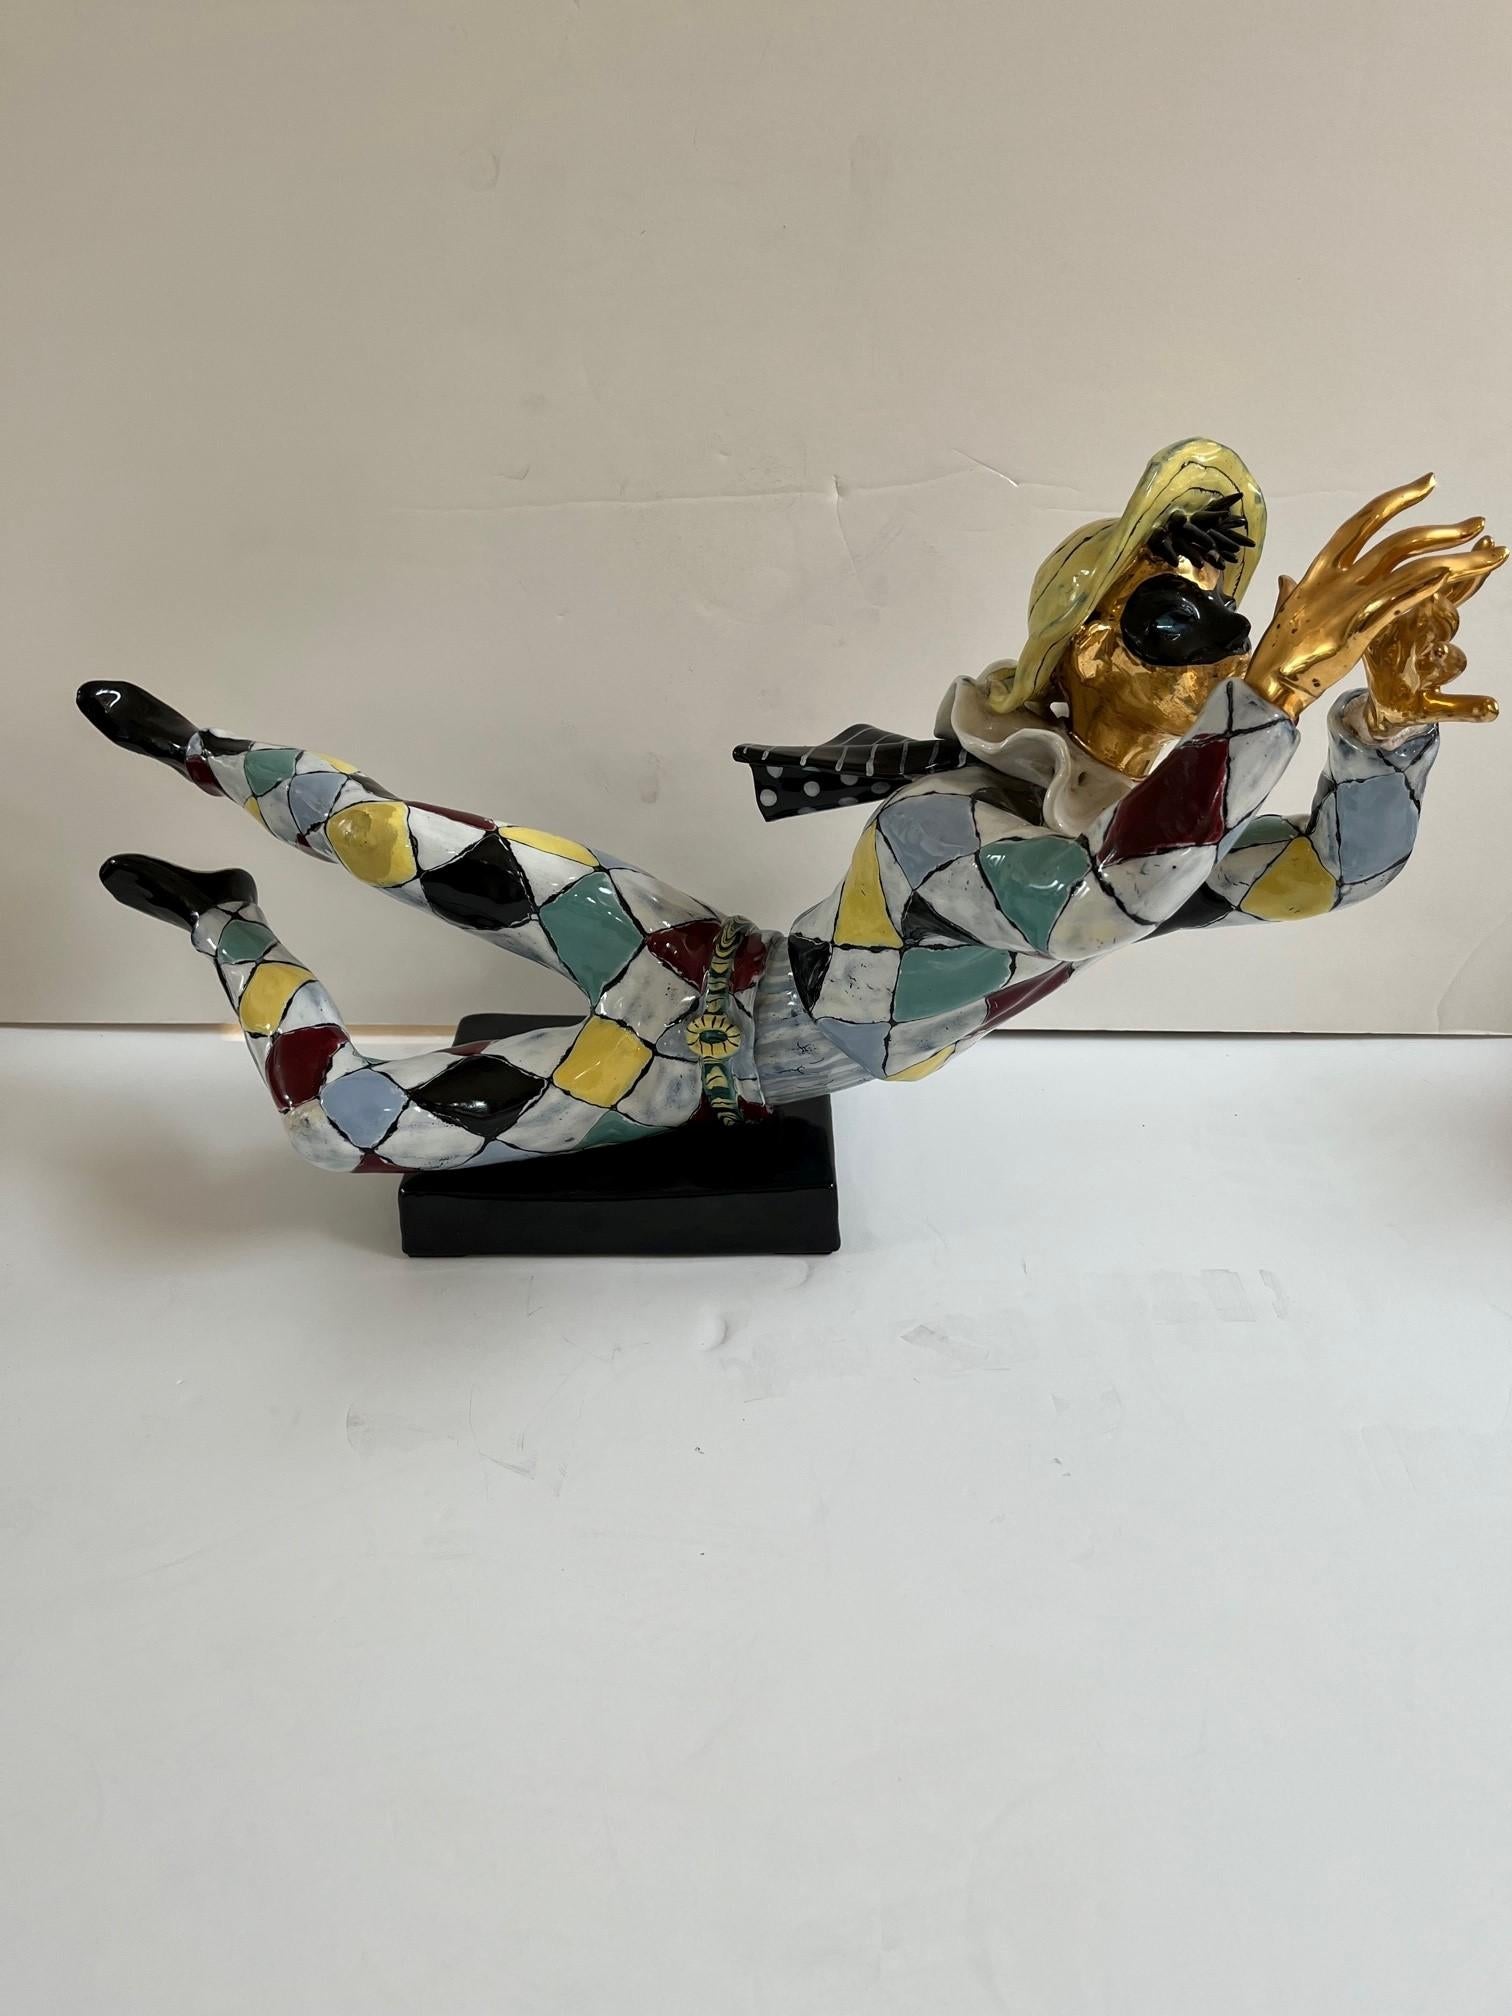 Vintage Italian Colorful Ceramic Harlequin Figure by Otello Rosa for San Polo For Sale 7